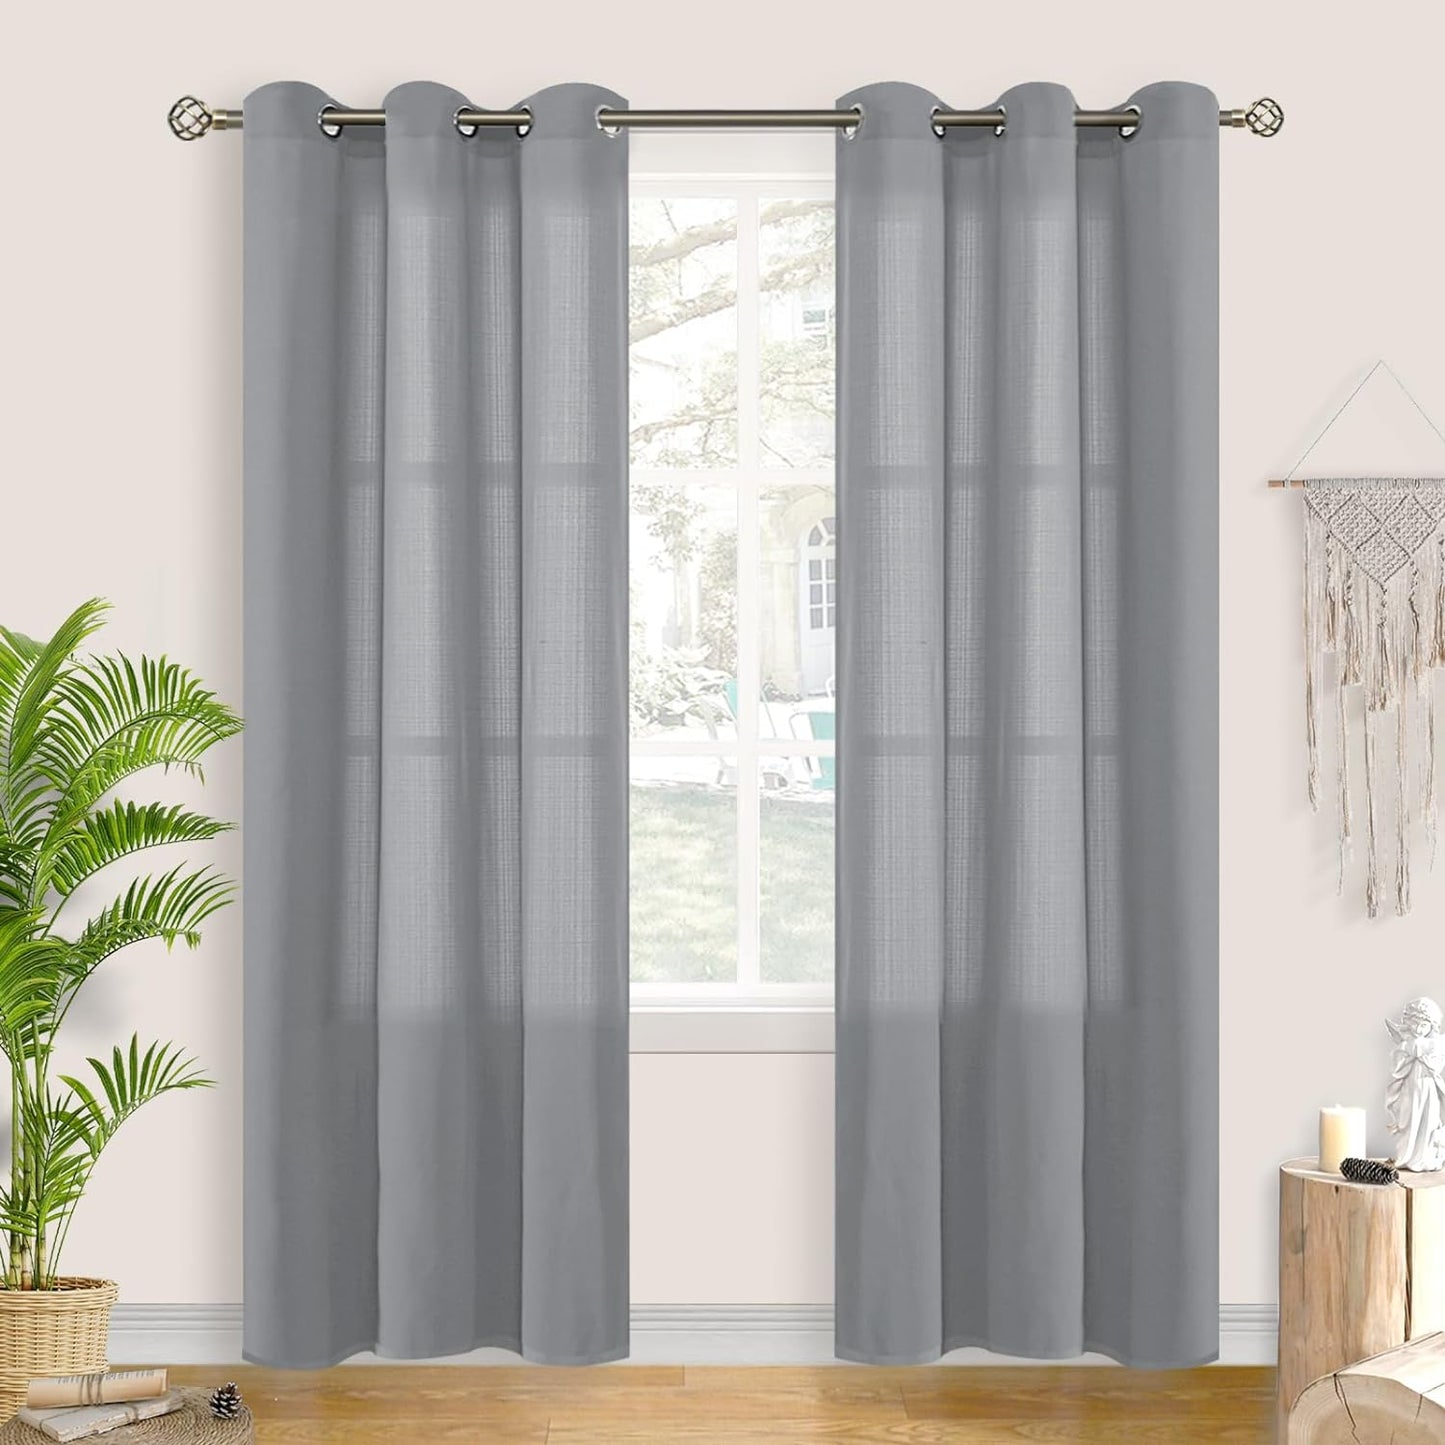 Bgment Natural Linen Look Semi Sheer Curtains for Bedroom, 52 X 54 Inch White Grommet Light Filtering Casual Textured Privacy Curtains for Bay Window, 2 Panels  BGment Grey 42W X 84L 